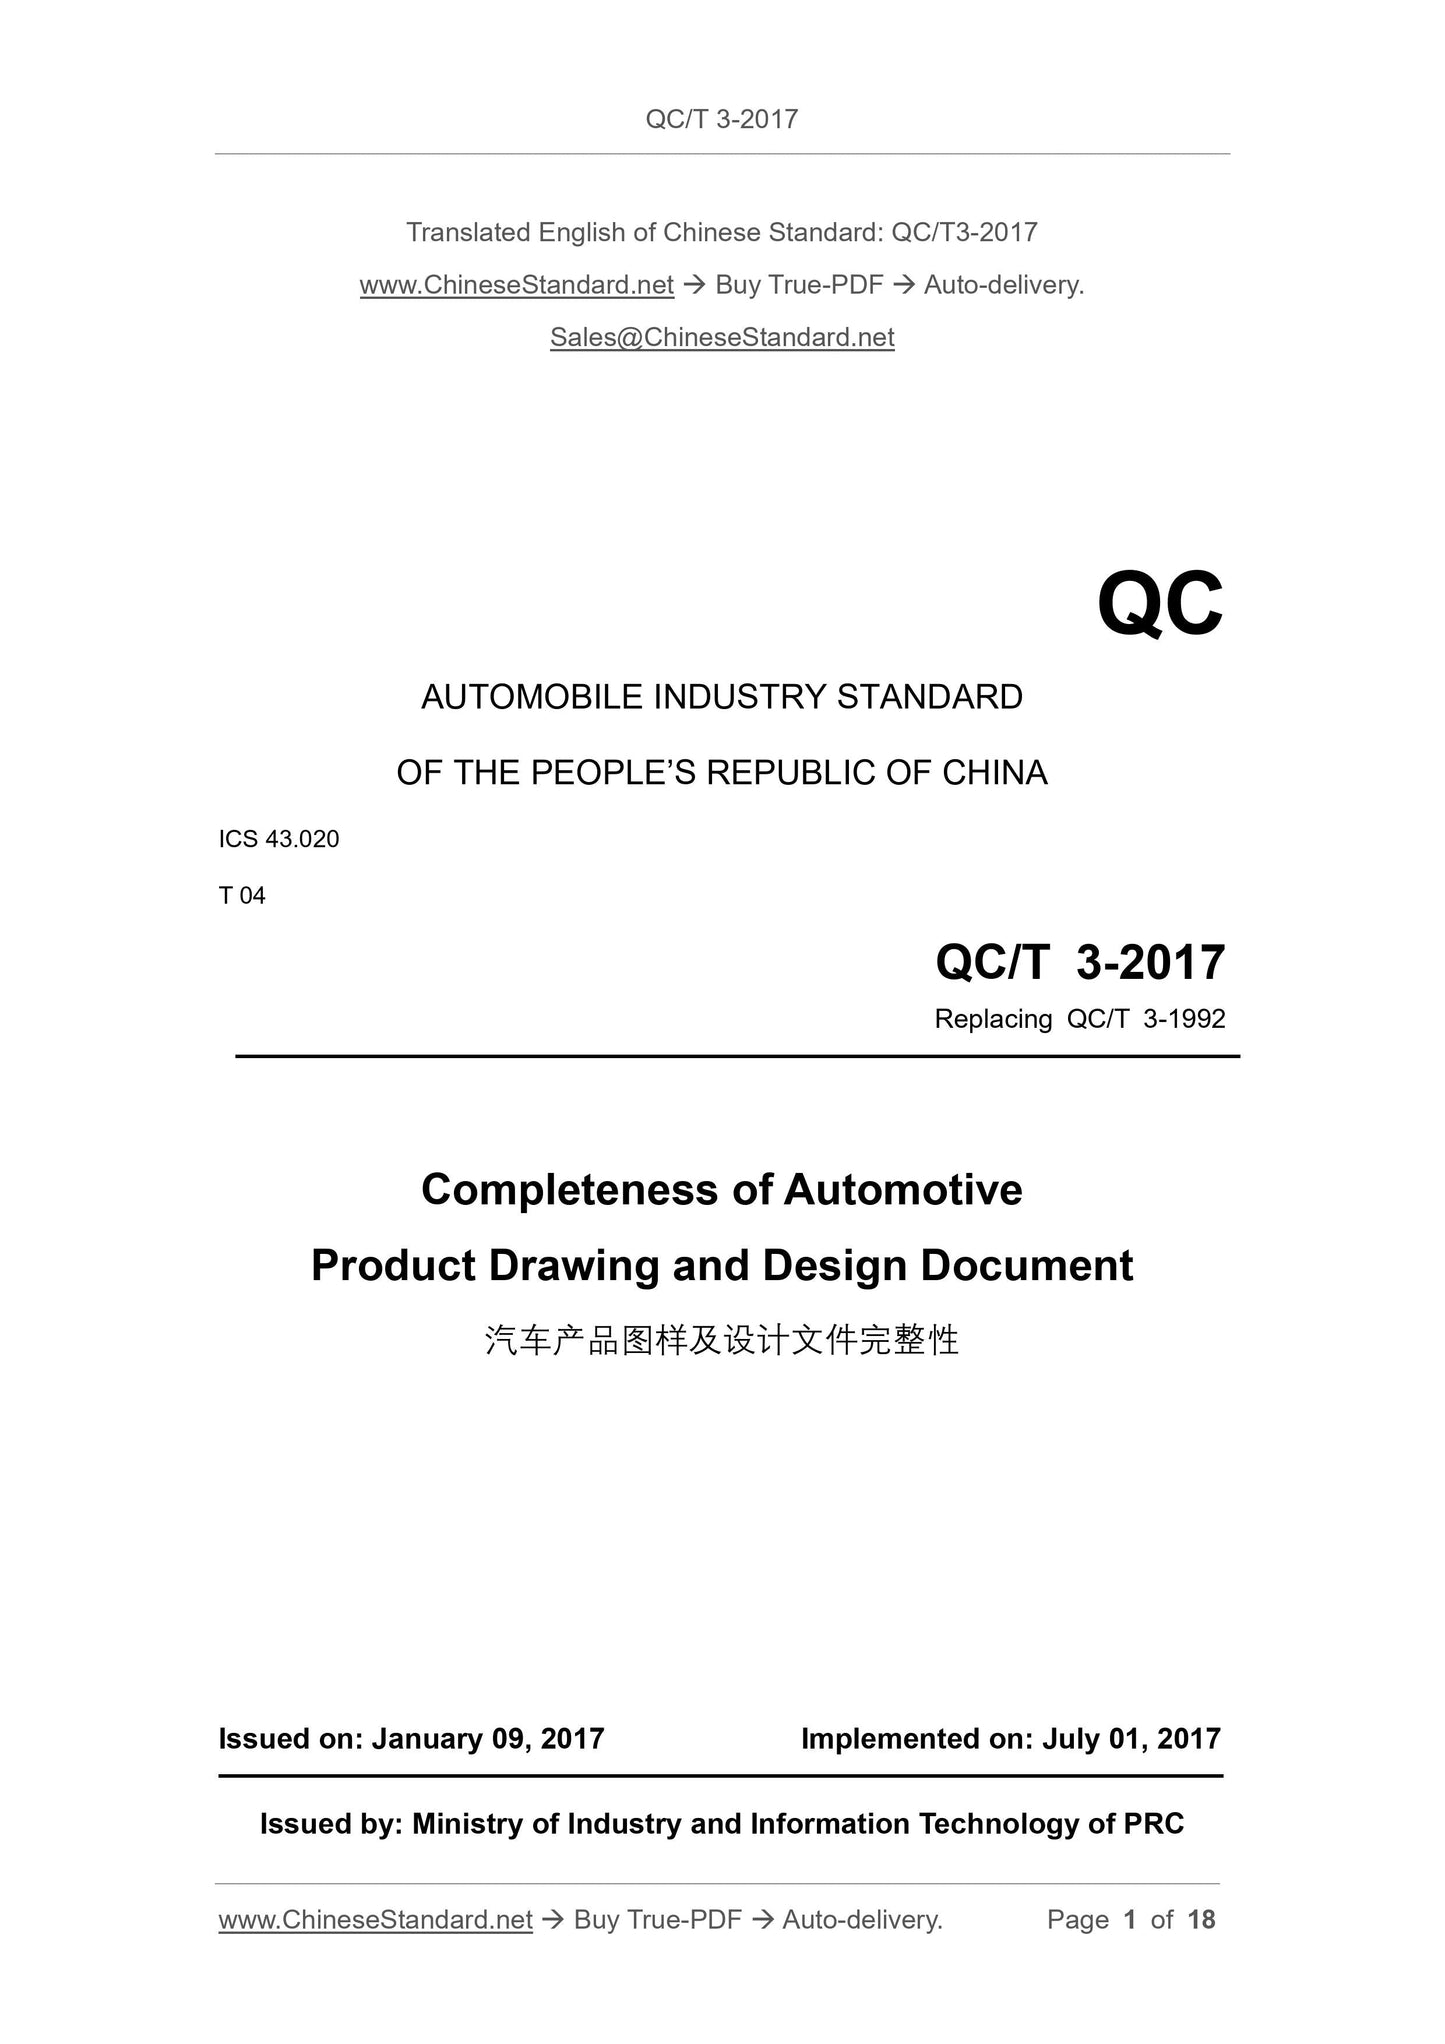 QC/T 3-2017 Page 1